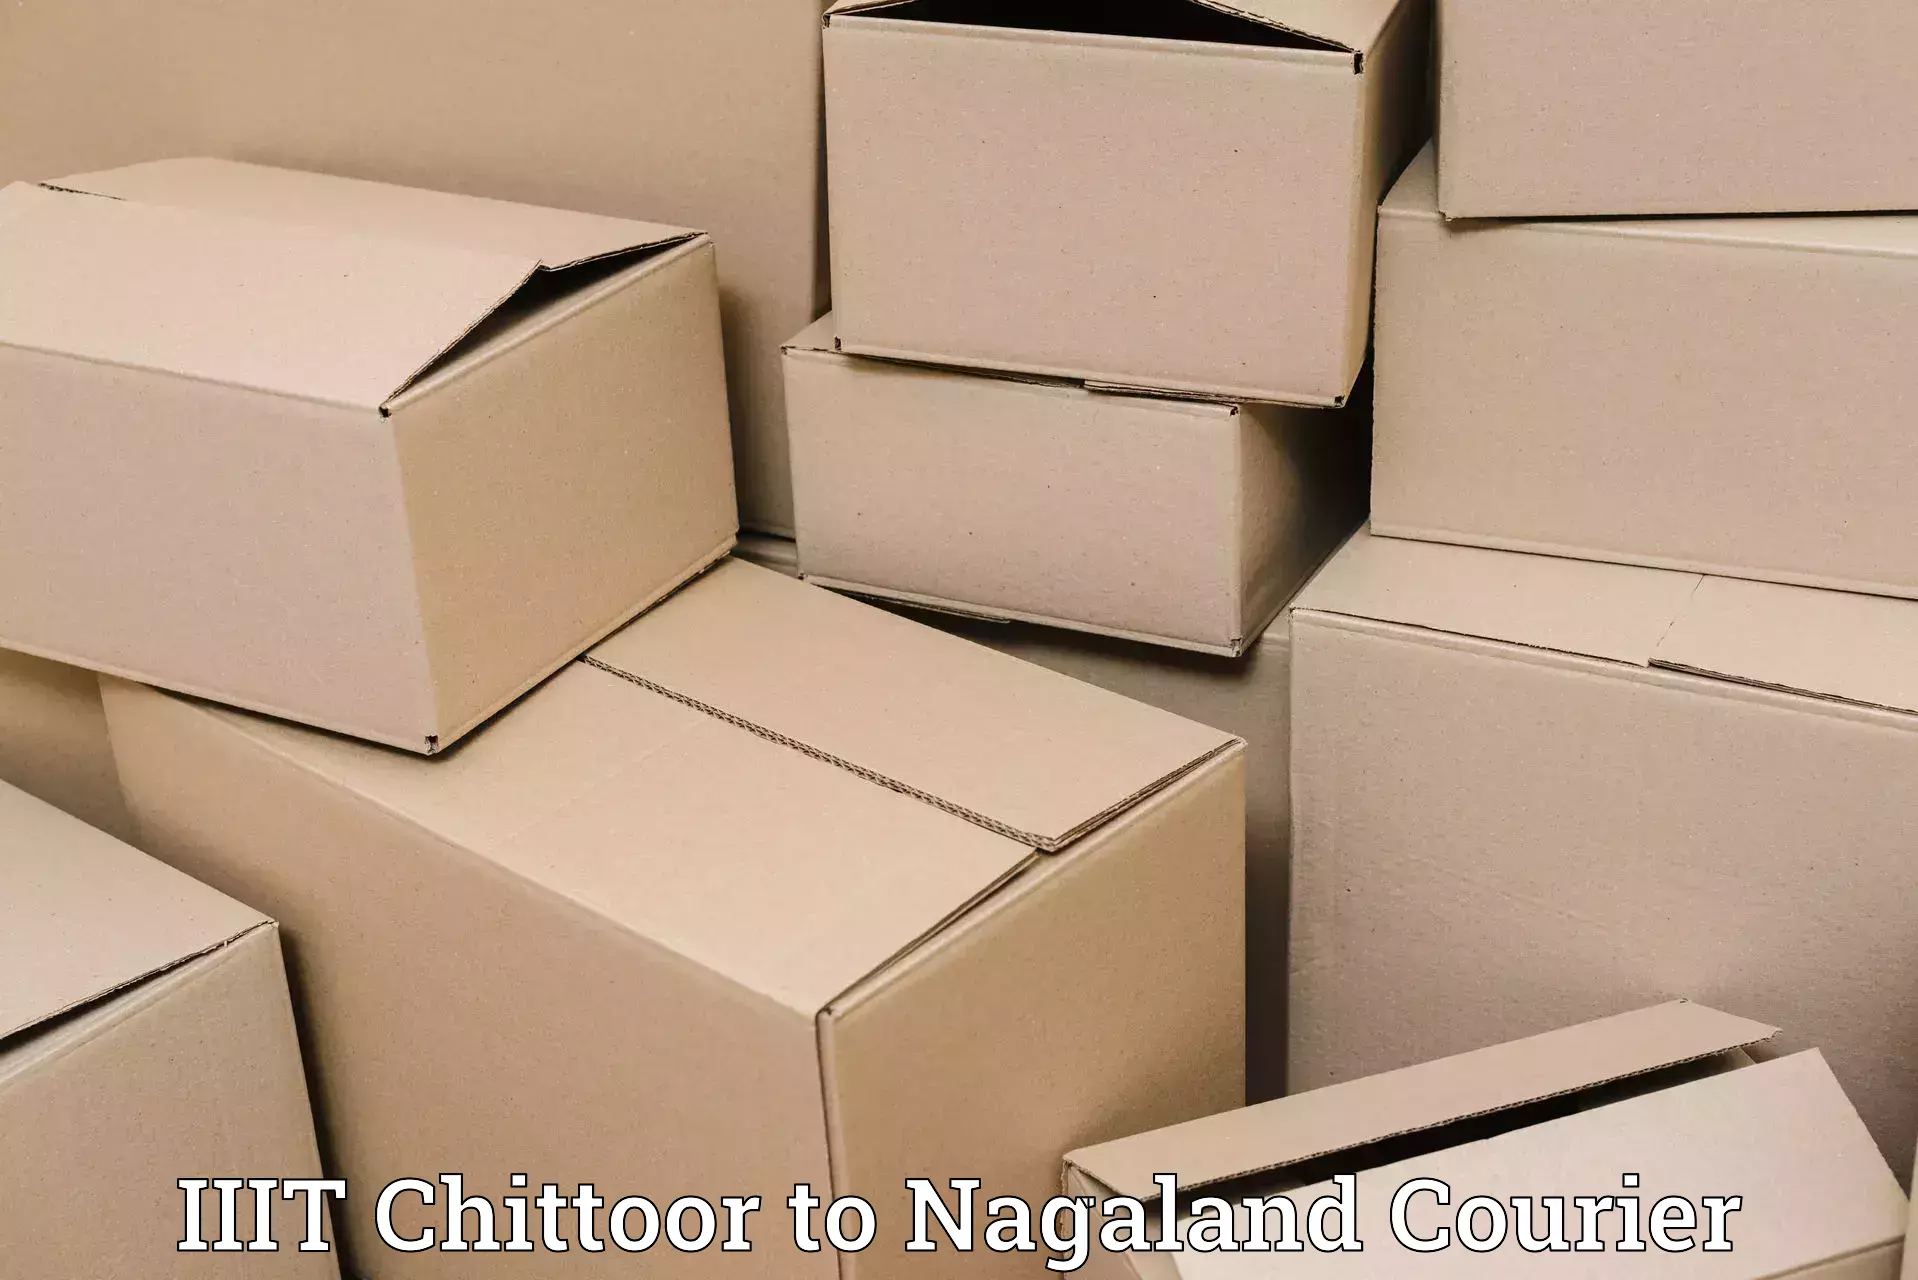 Efficient freight service IIIT Chittoor to NIT Nagaland